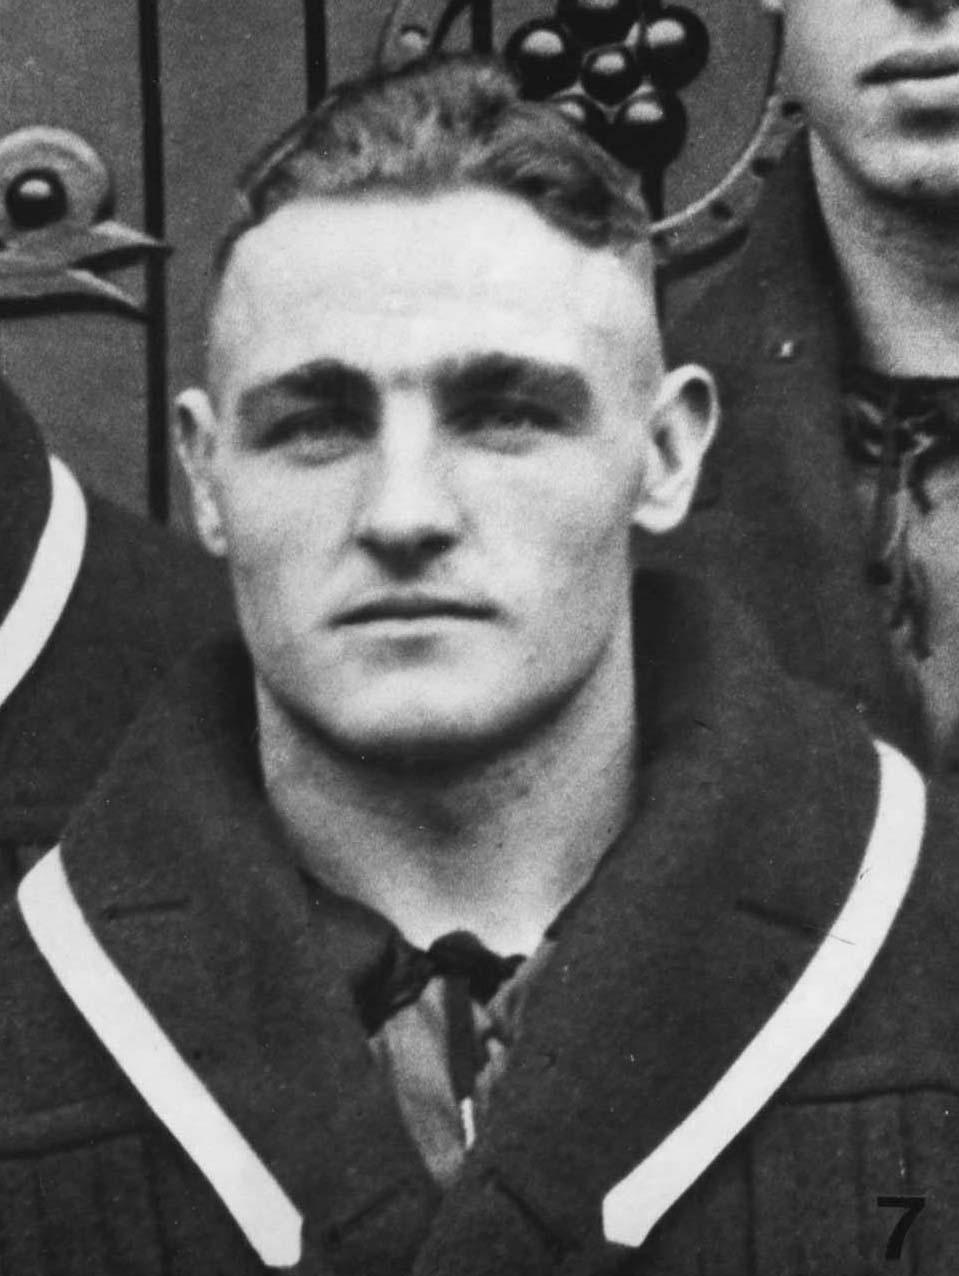 Joseph Breen from the Candian Sports Hall-of-Fame